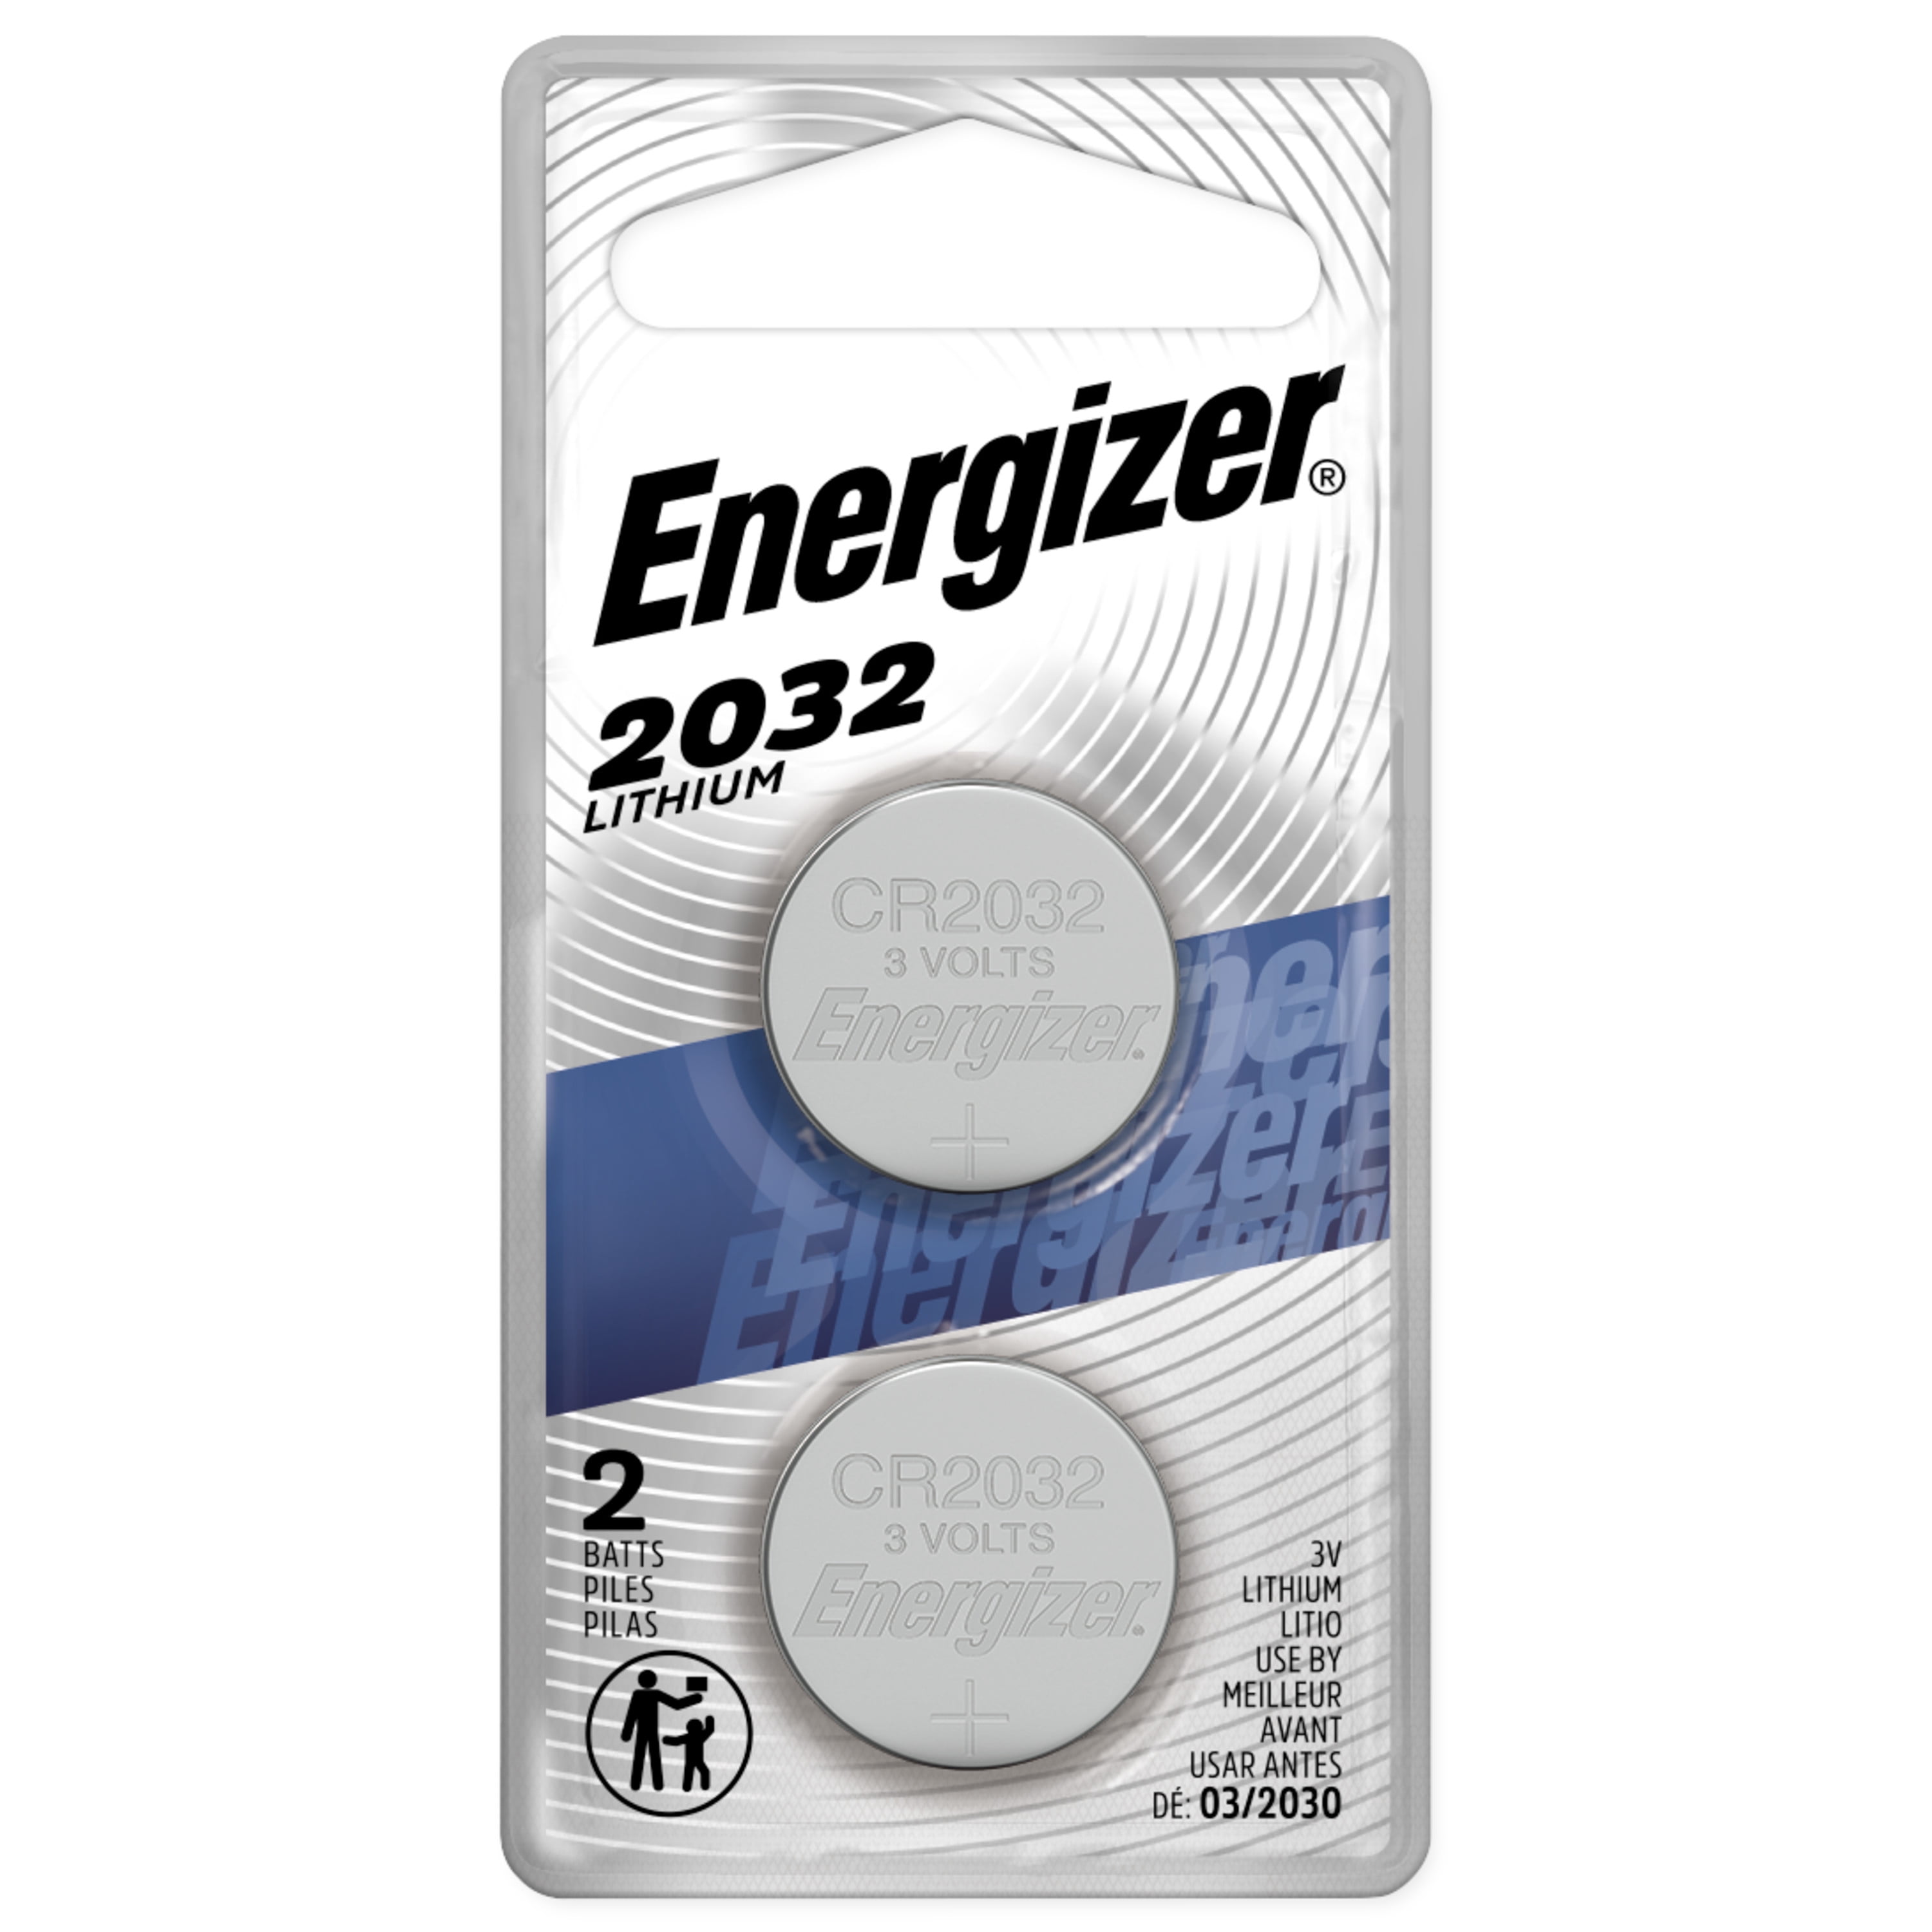 Charming Monograph too much Energizer 2032 Batteries (2 Pack), 3V Lithium Coin Batteries - Walmart.com